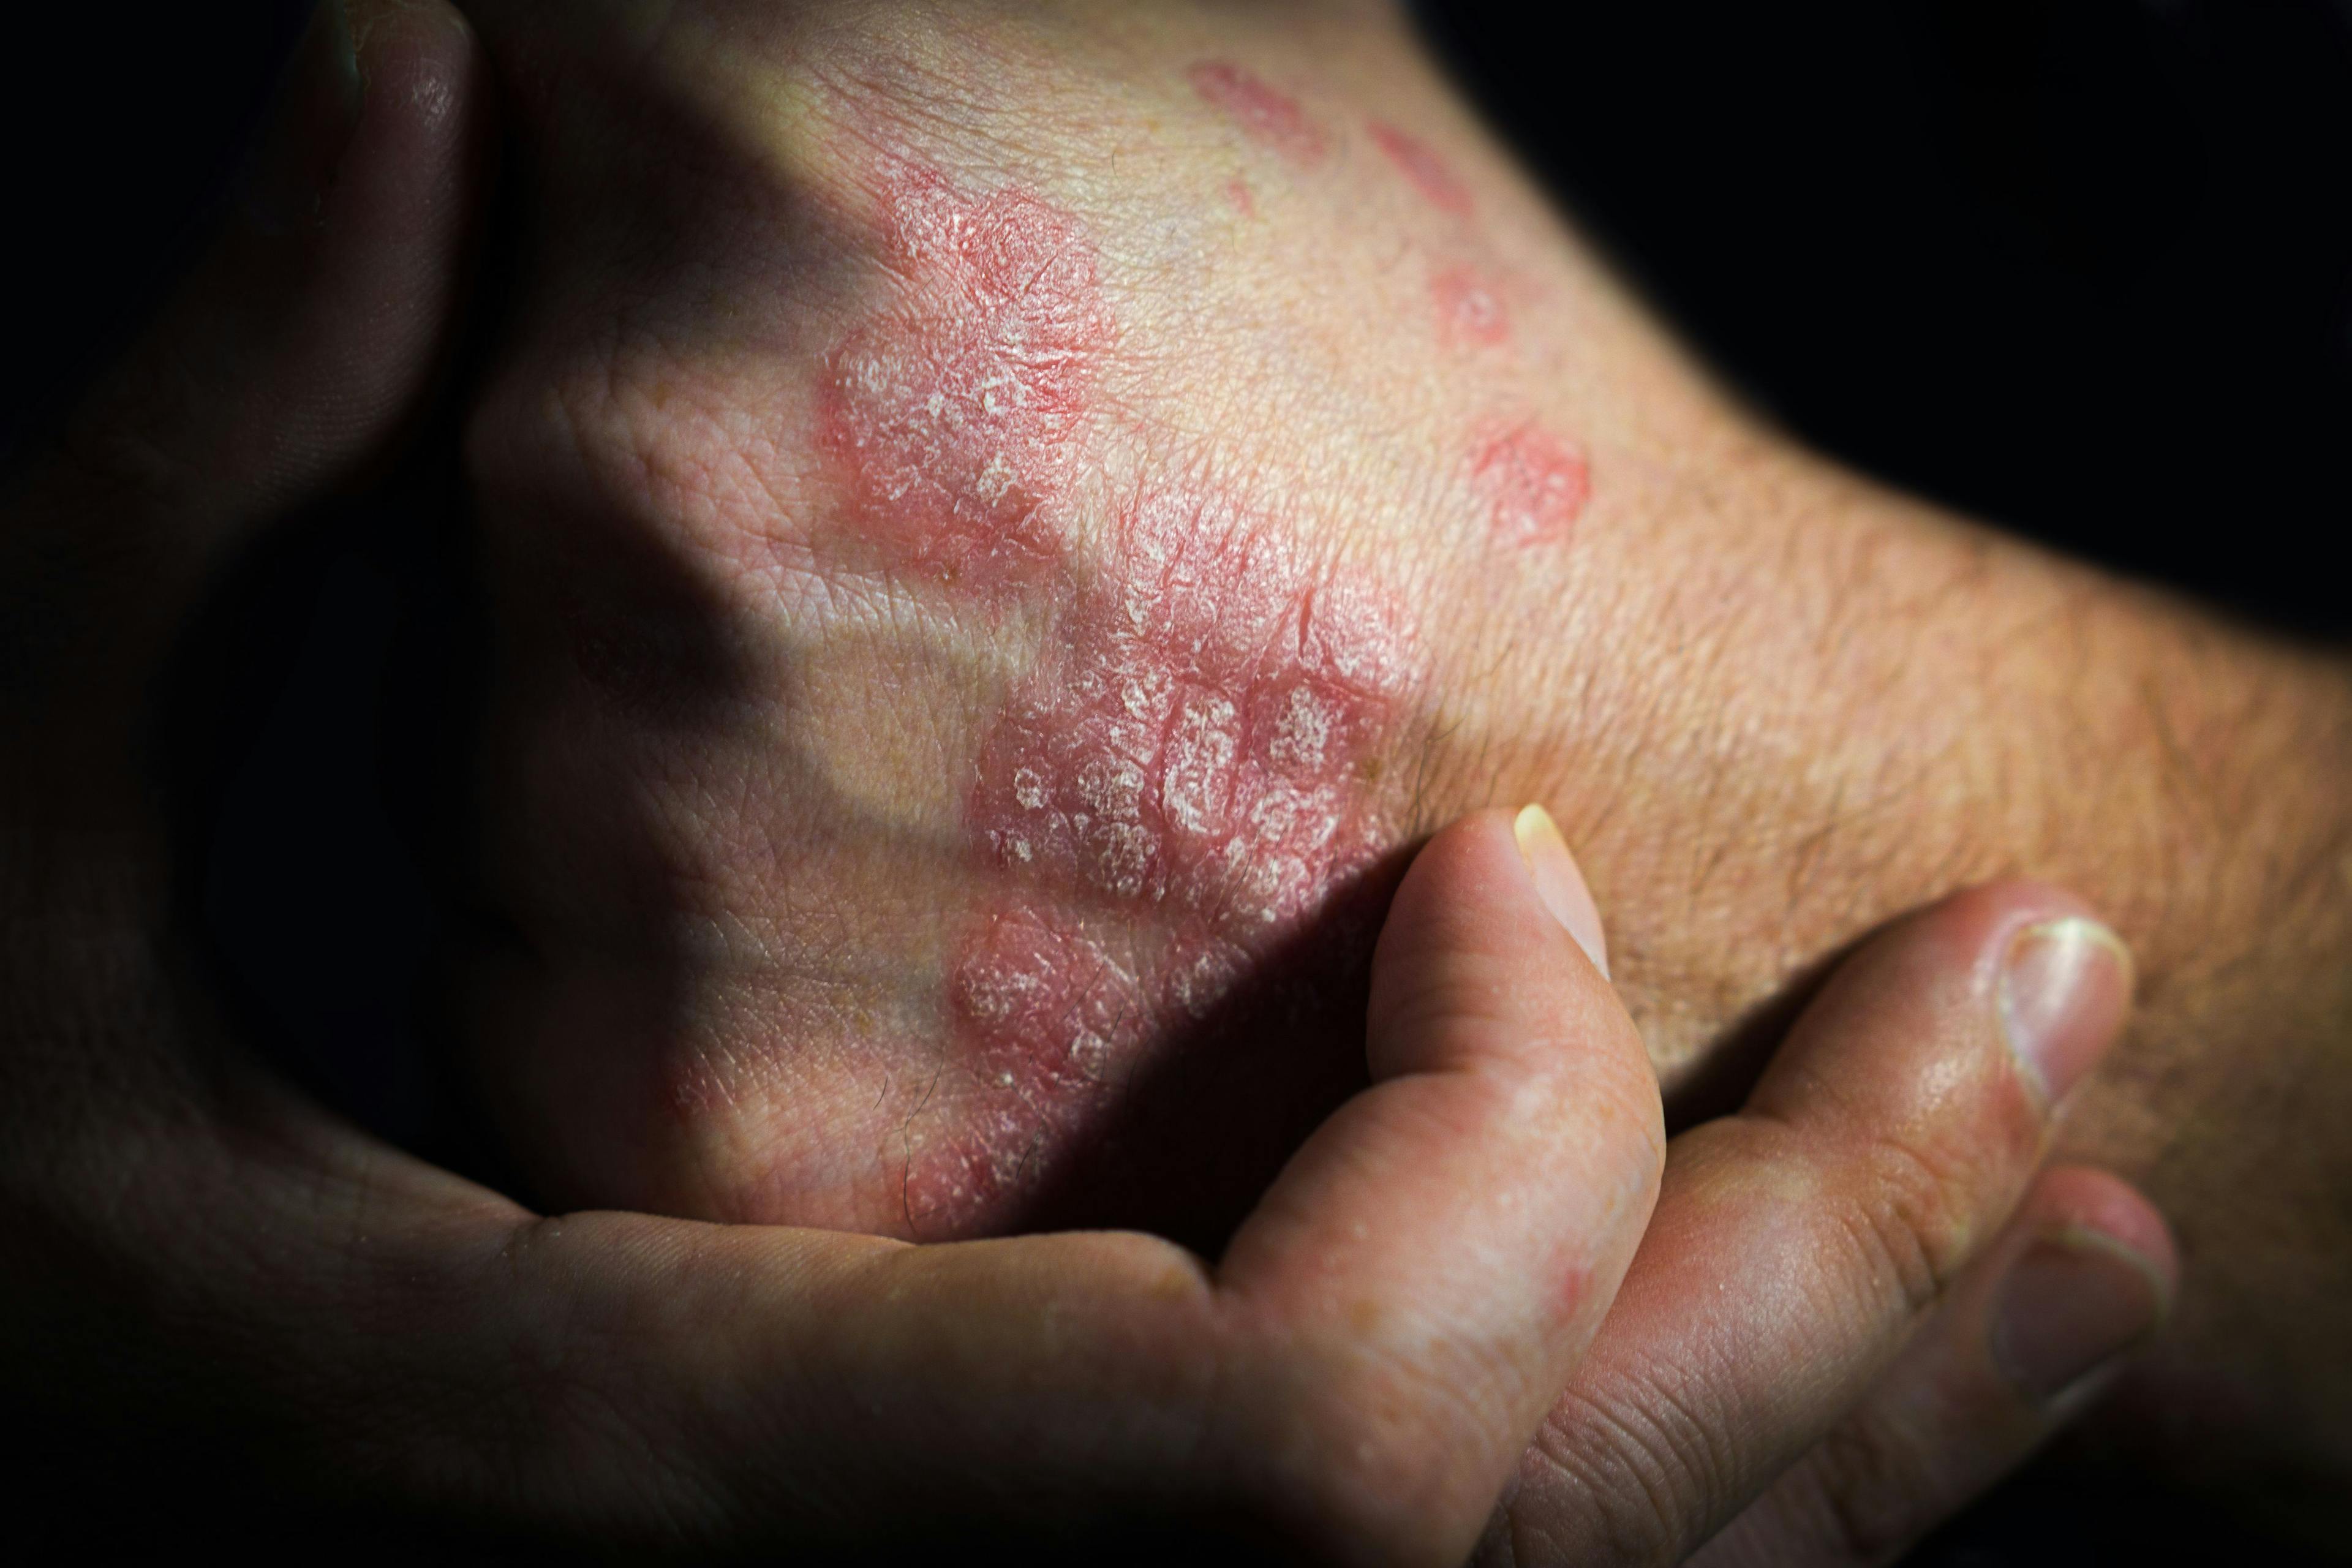 Psoriasis is an autoimmune human disease. a man holds a hand at a psoriasis affected area of the skin | Image Credit: SergeVo - stock.adobe.com